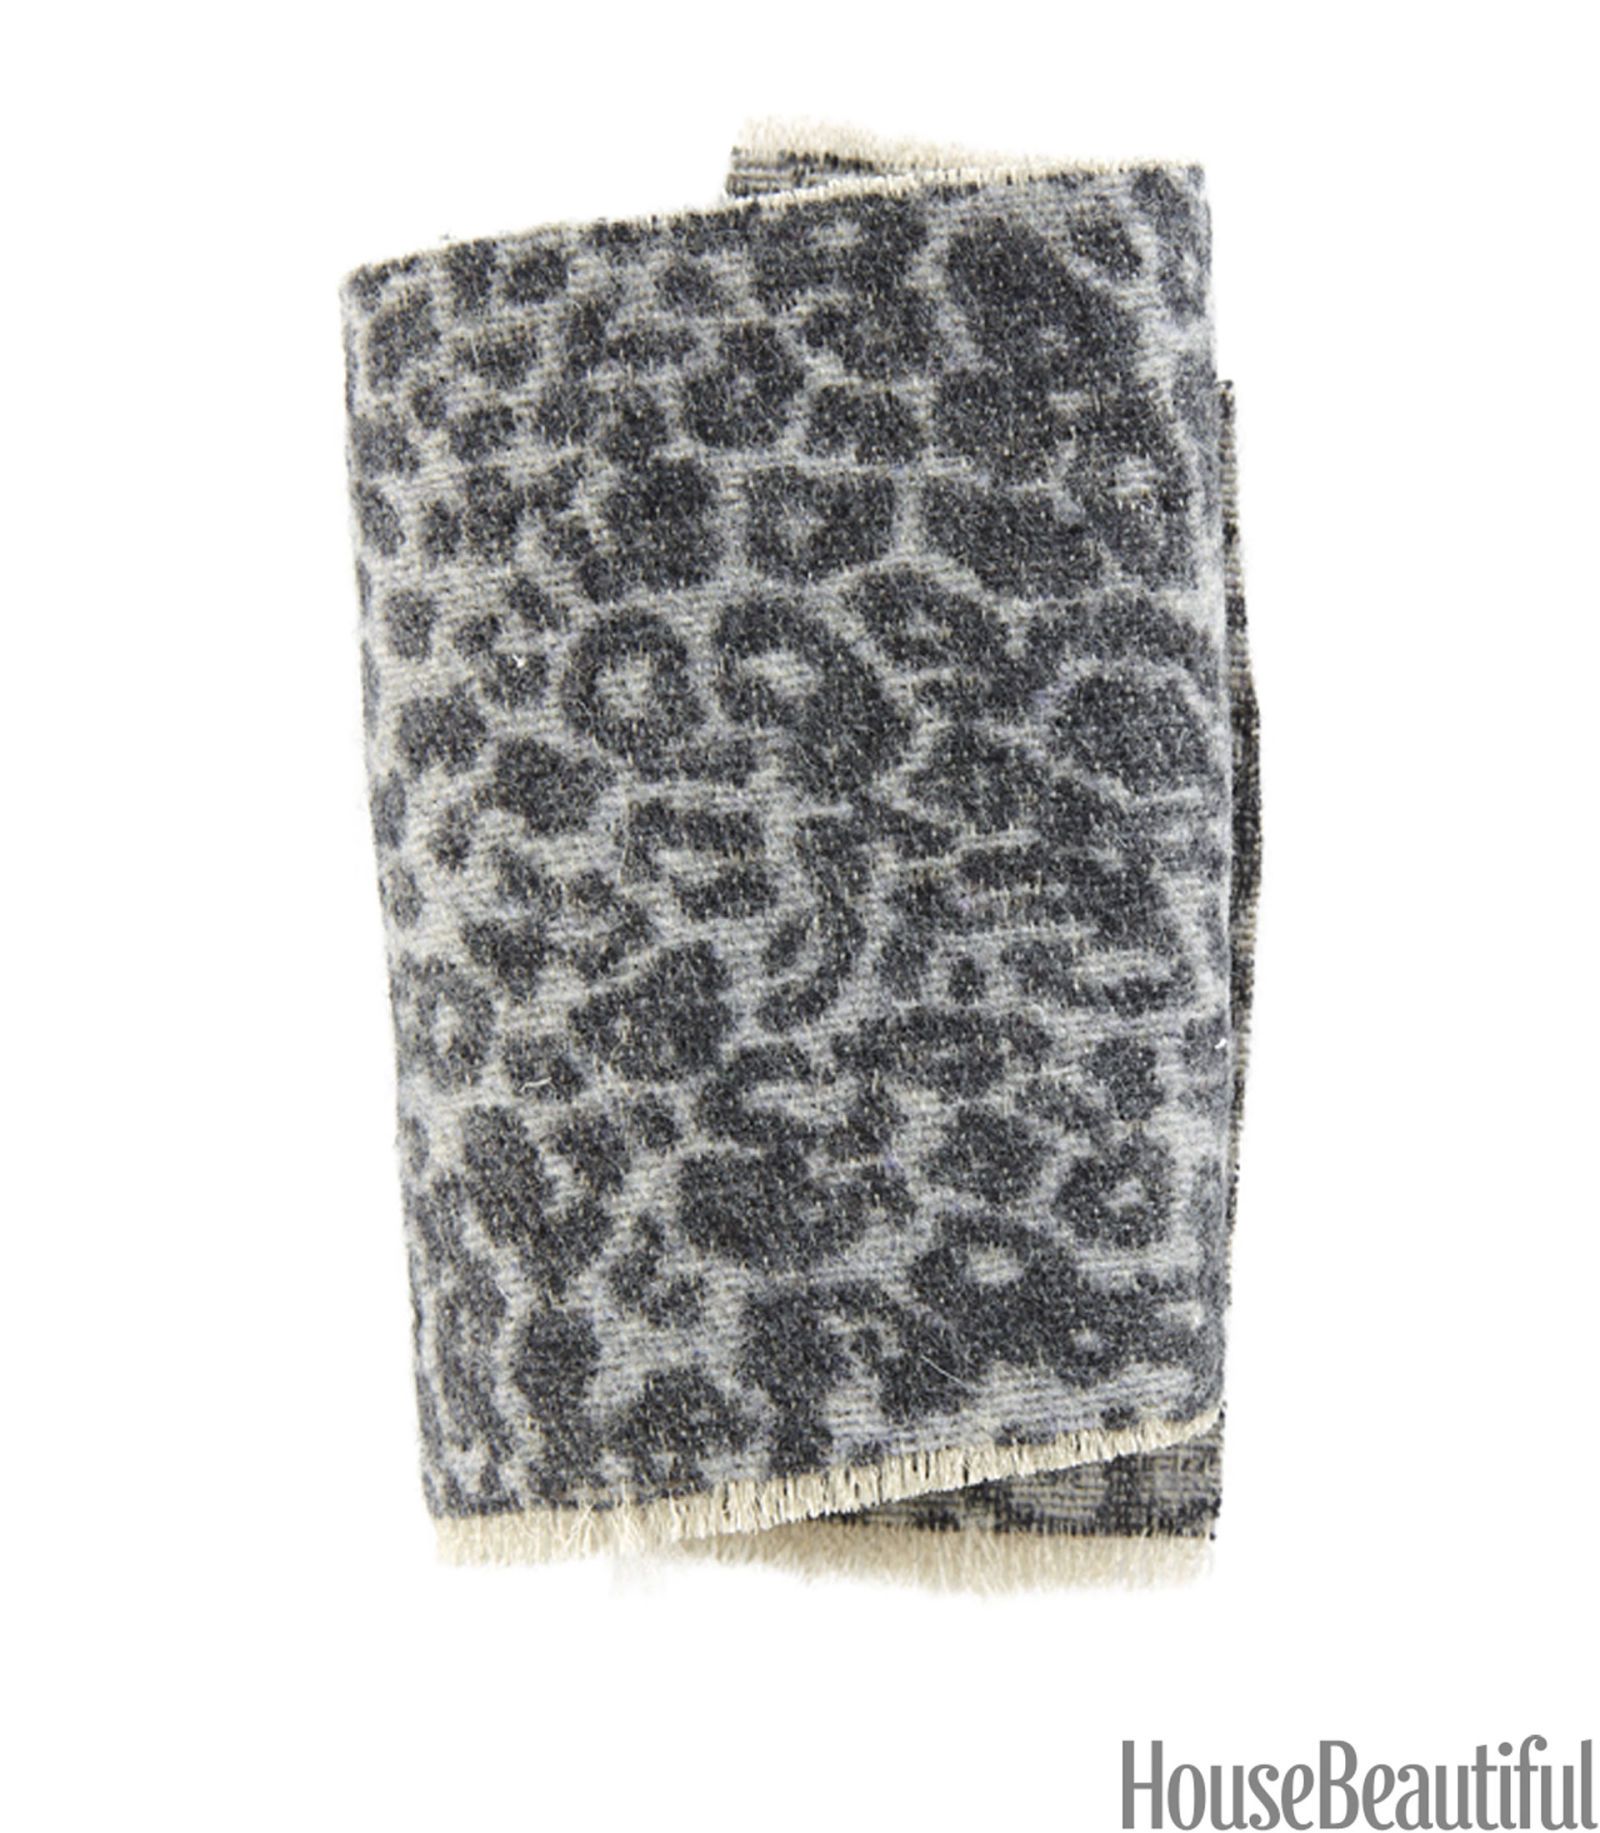 Leopard Print Fabric - Leopard Print Upholstery Fabric and Textiles